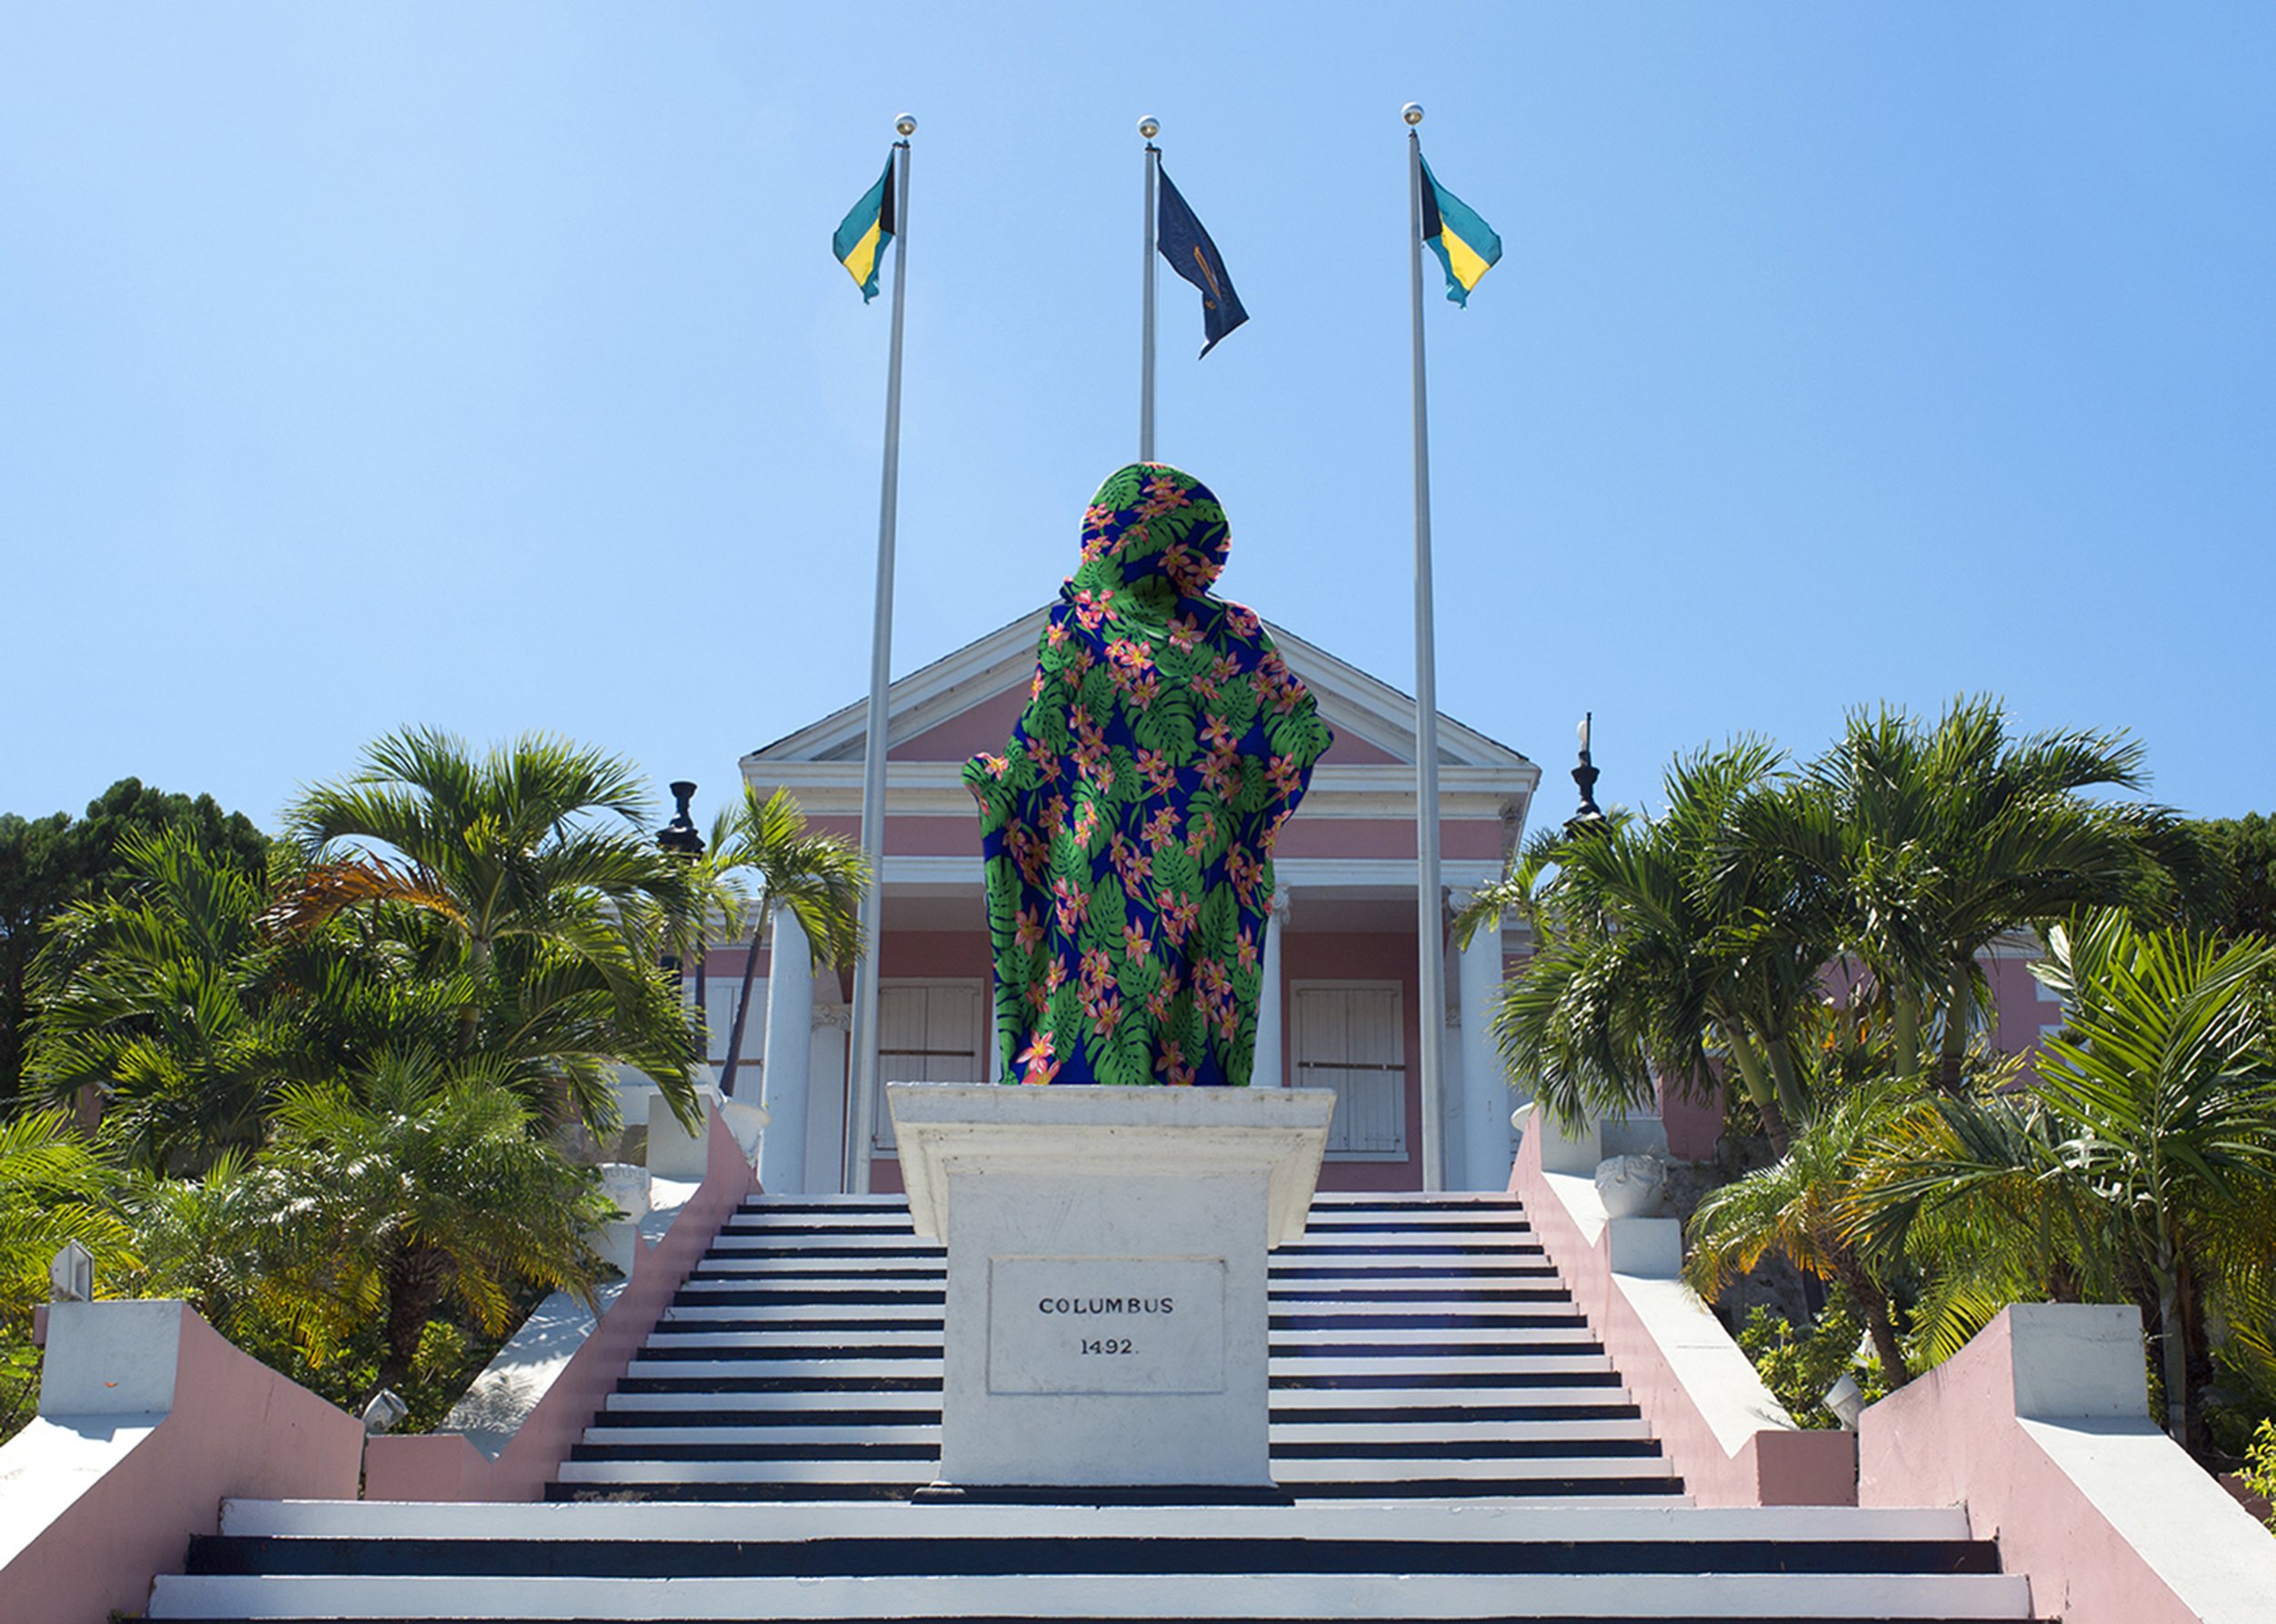 1.Proposal-for-artistic-intervention-on-the-Columbus-statue-in-front-of-the-Government-House-in-Nassau--The-Bahamas_3000.jpg